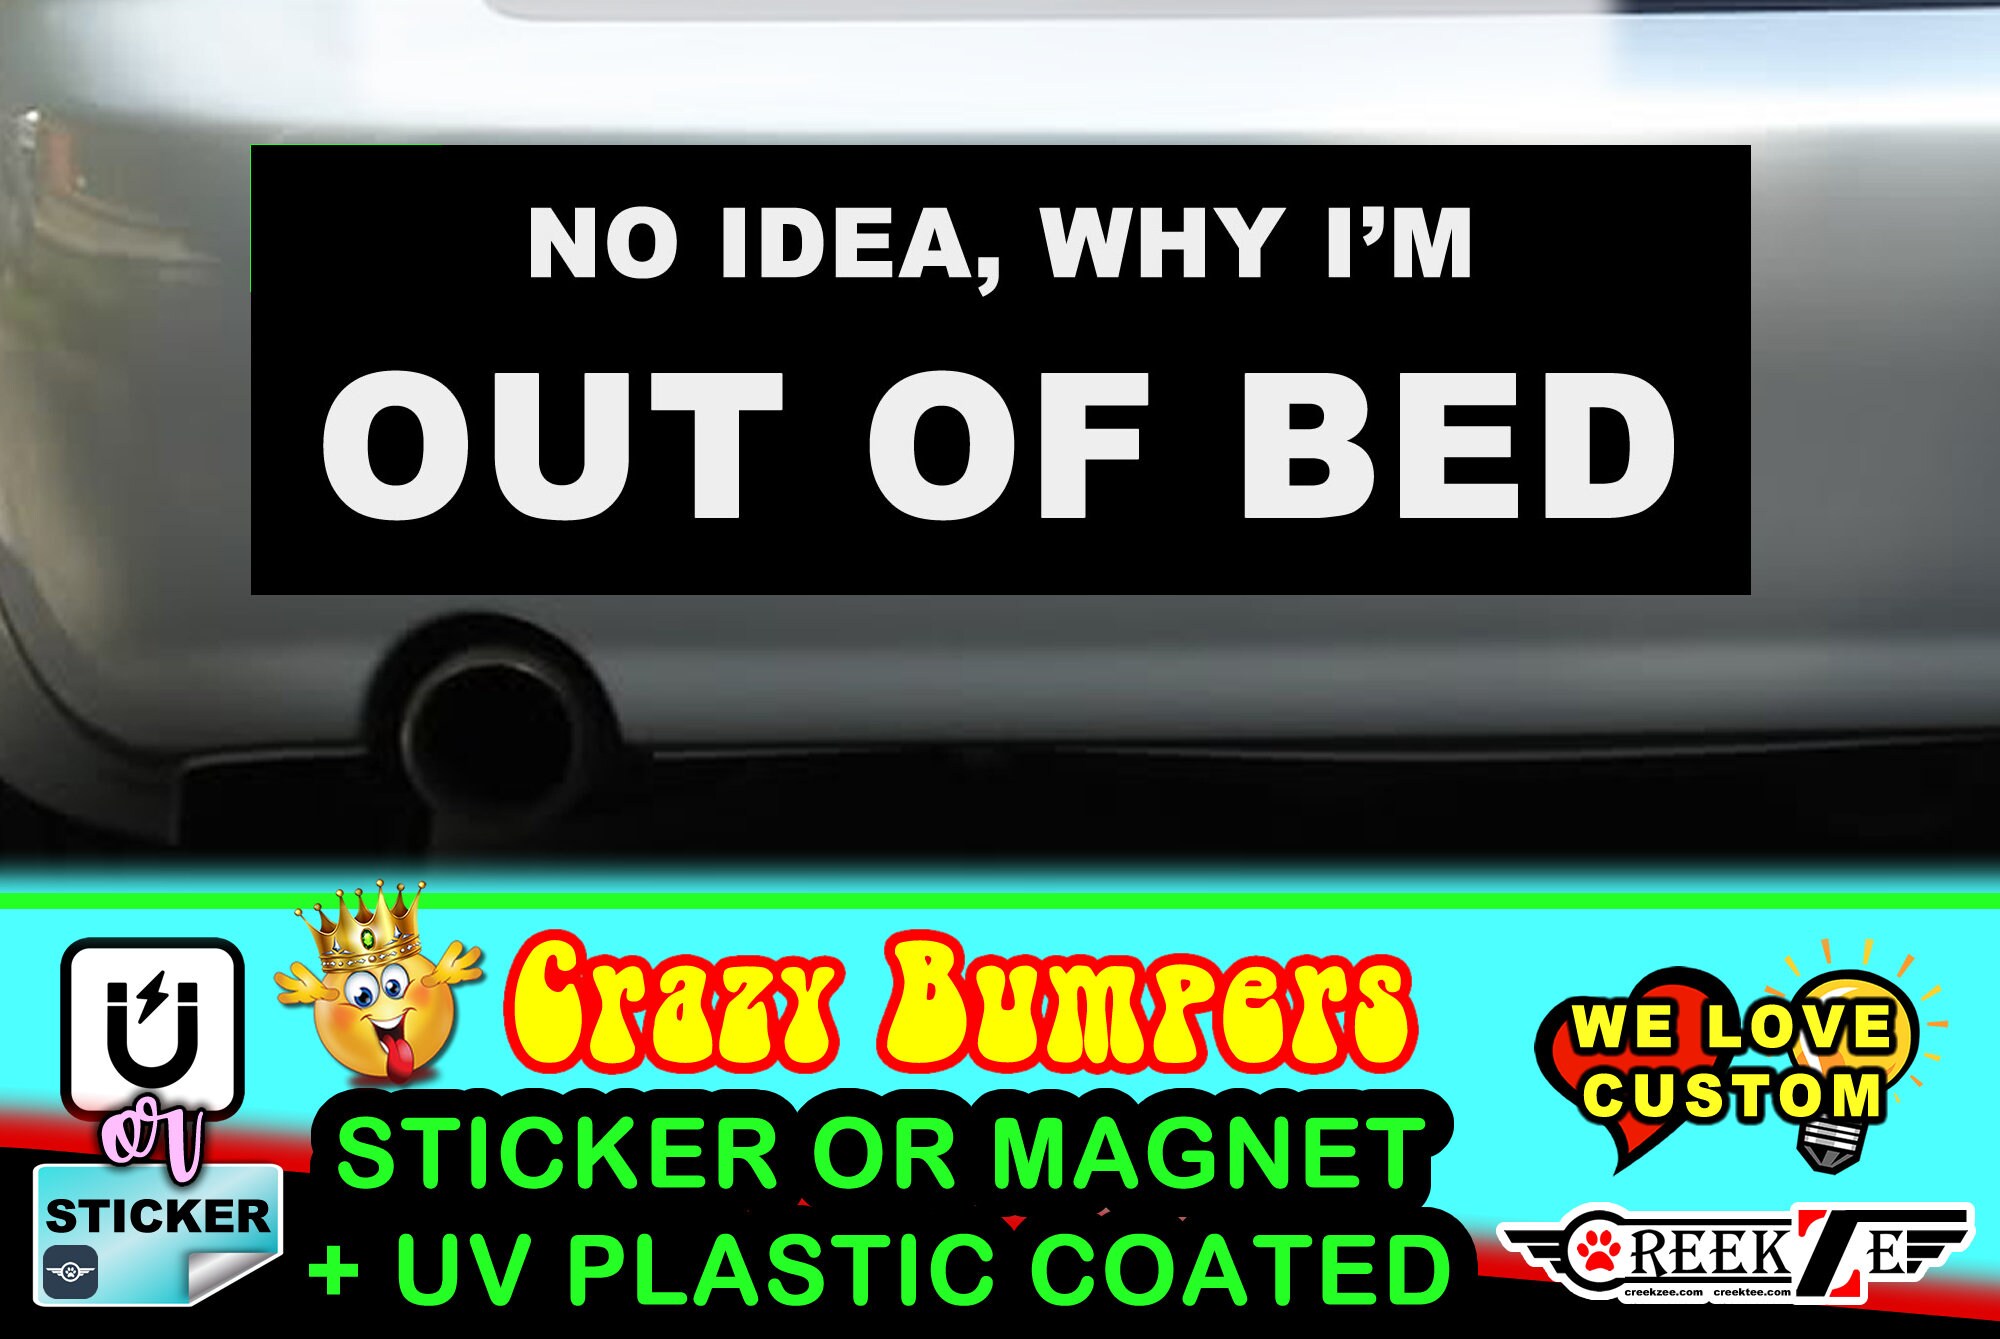 No Idea, Why I'm Out Of Bed Funny Bumper Sticker or Magnet, various sizes available with UV laminate protection